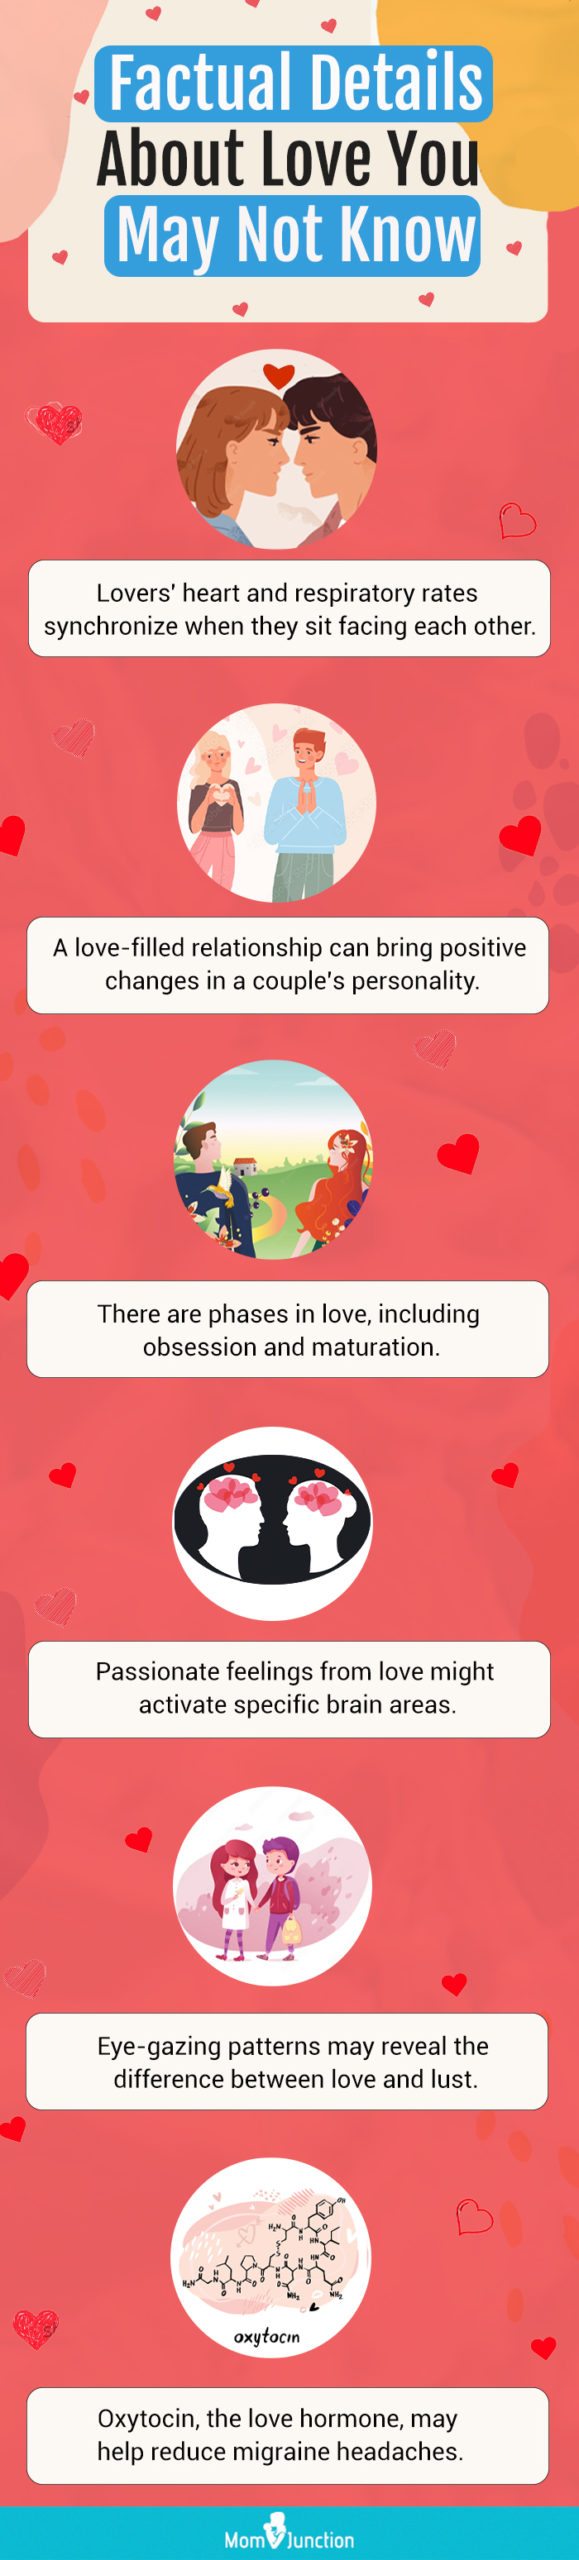 factual details about love you may not know (infographic)